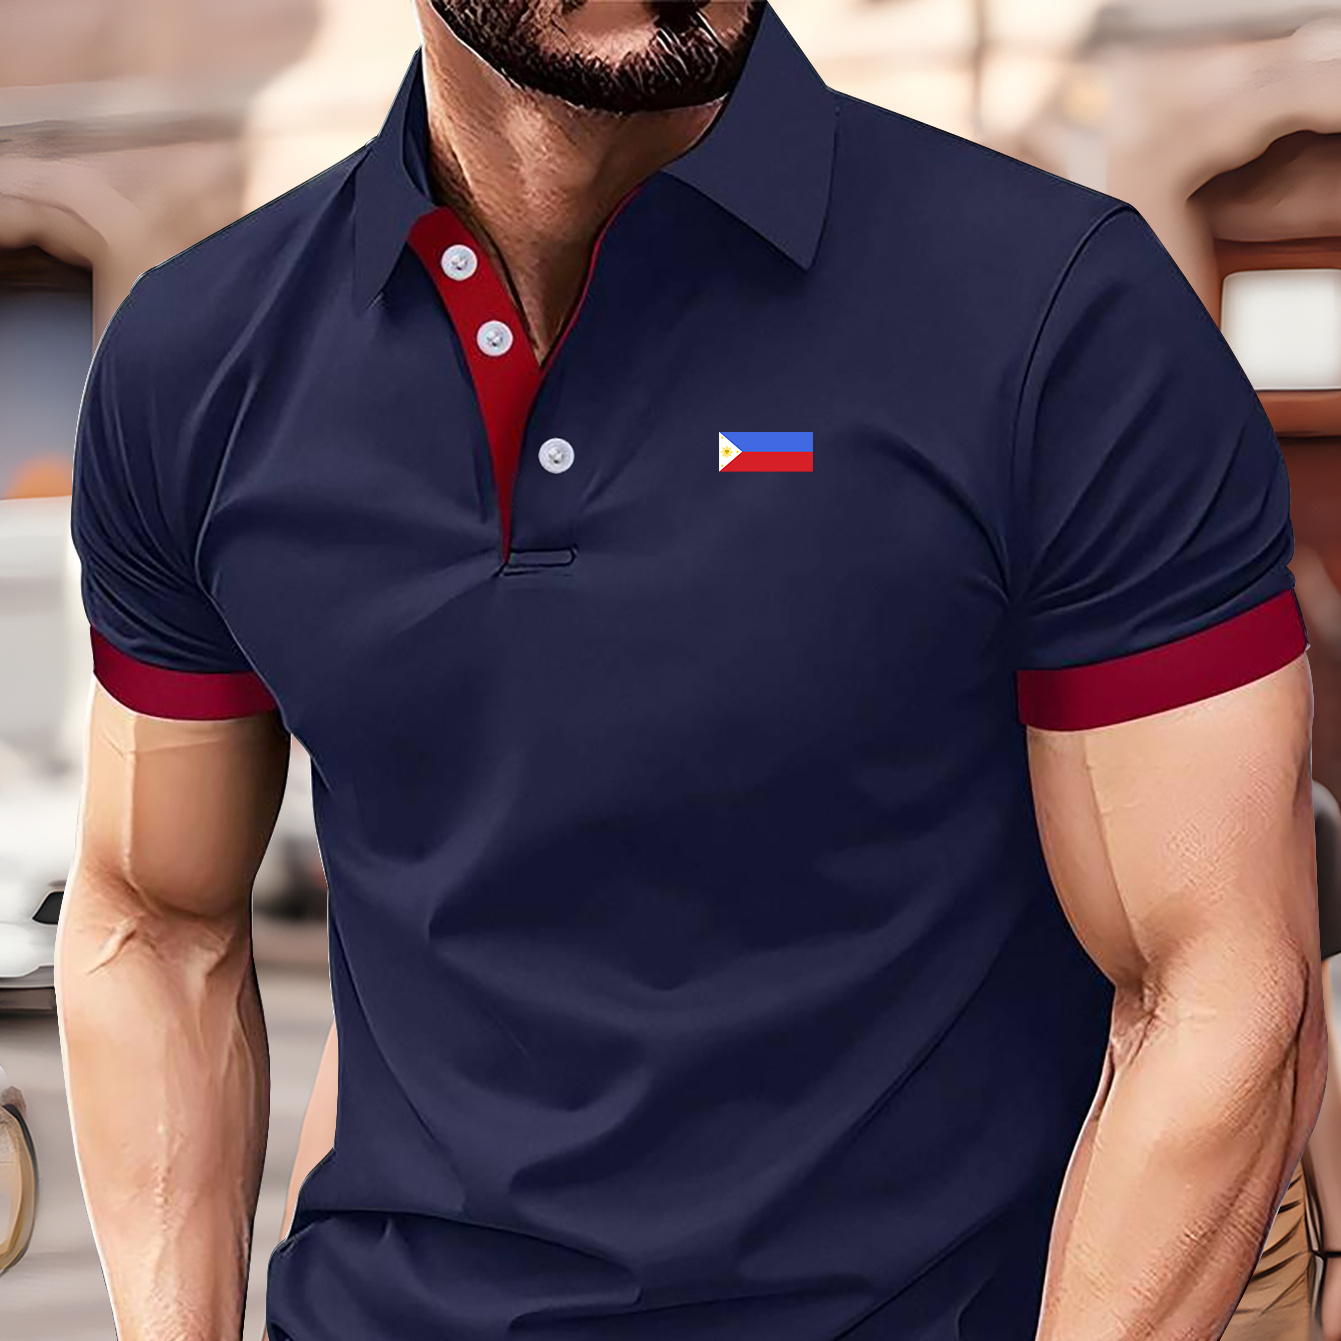 

Flag Of The Philippines Creative Print Casual Golf Shirt For Men, Polyester Short Sleeve, Regular Fit, Collared Button Summer Apparel For Everyday Wear